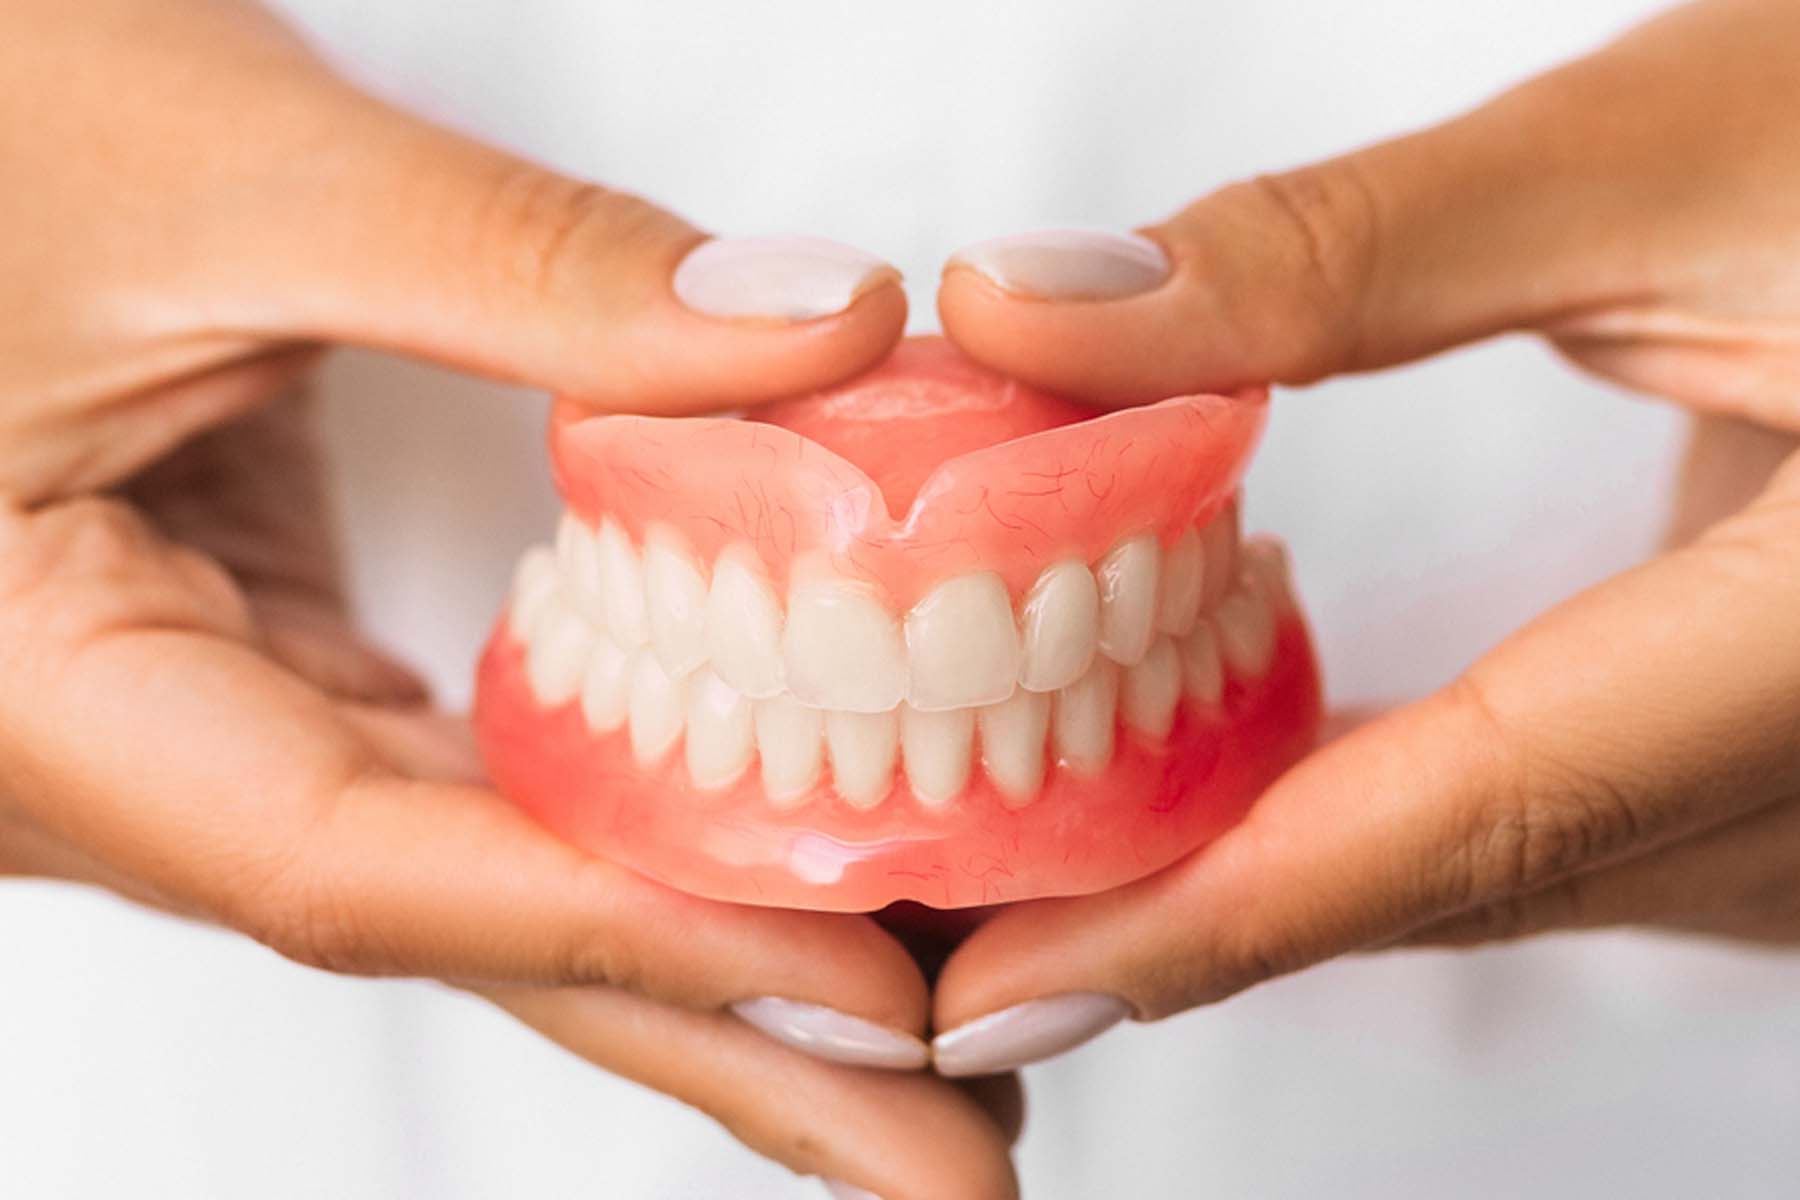 How Long Does It Take To Get Dentures After Teeth Are Pulled?